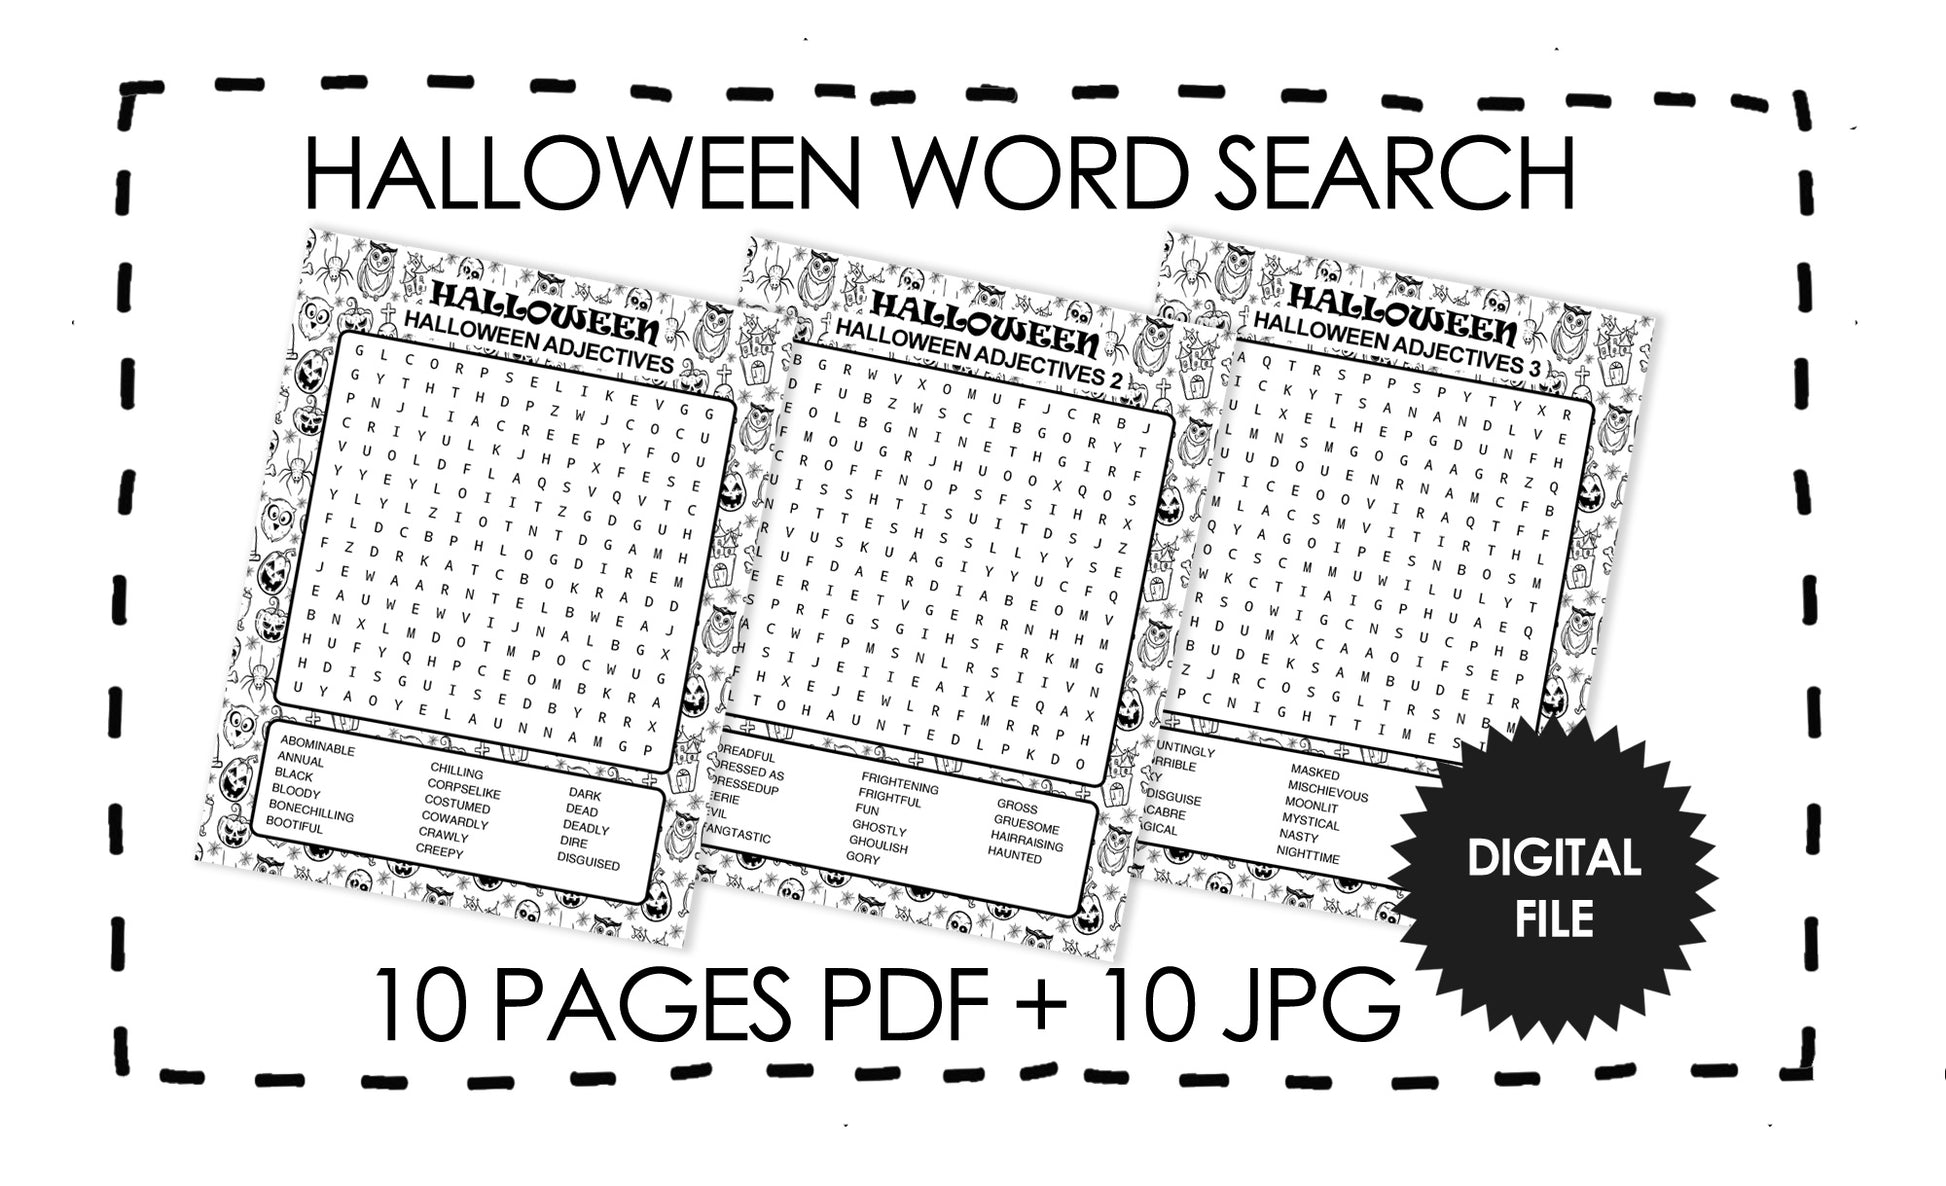 Halloween Word Search Pages For Kids,10 Digital Printable Pages 5-7 pages preview